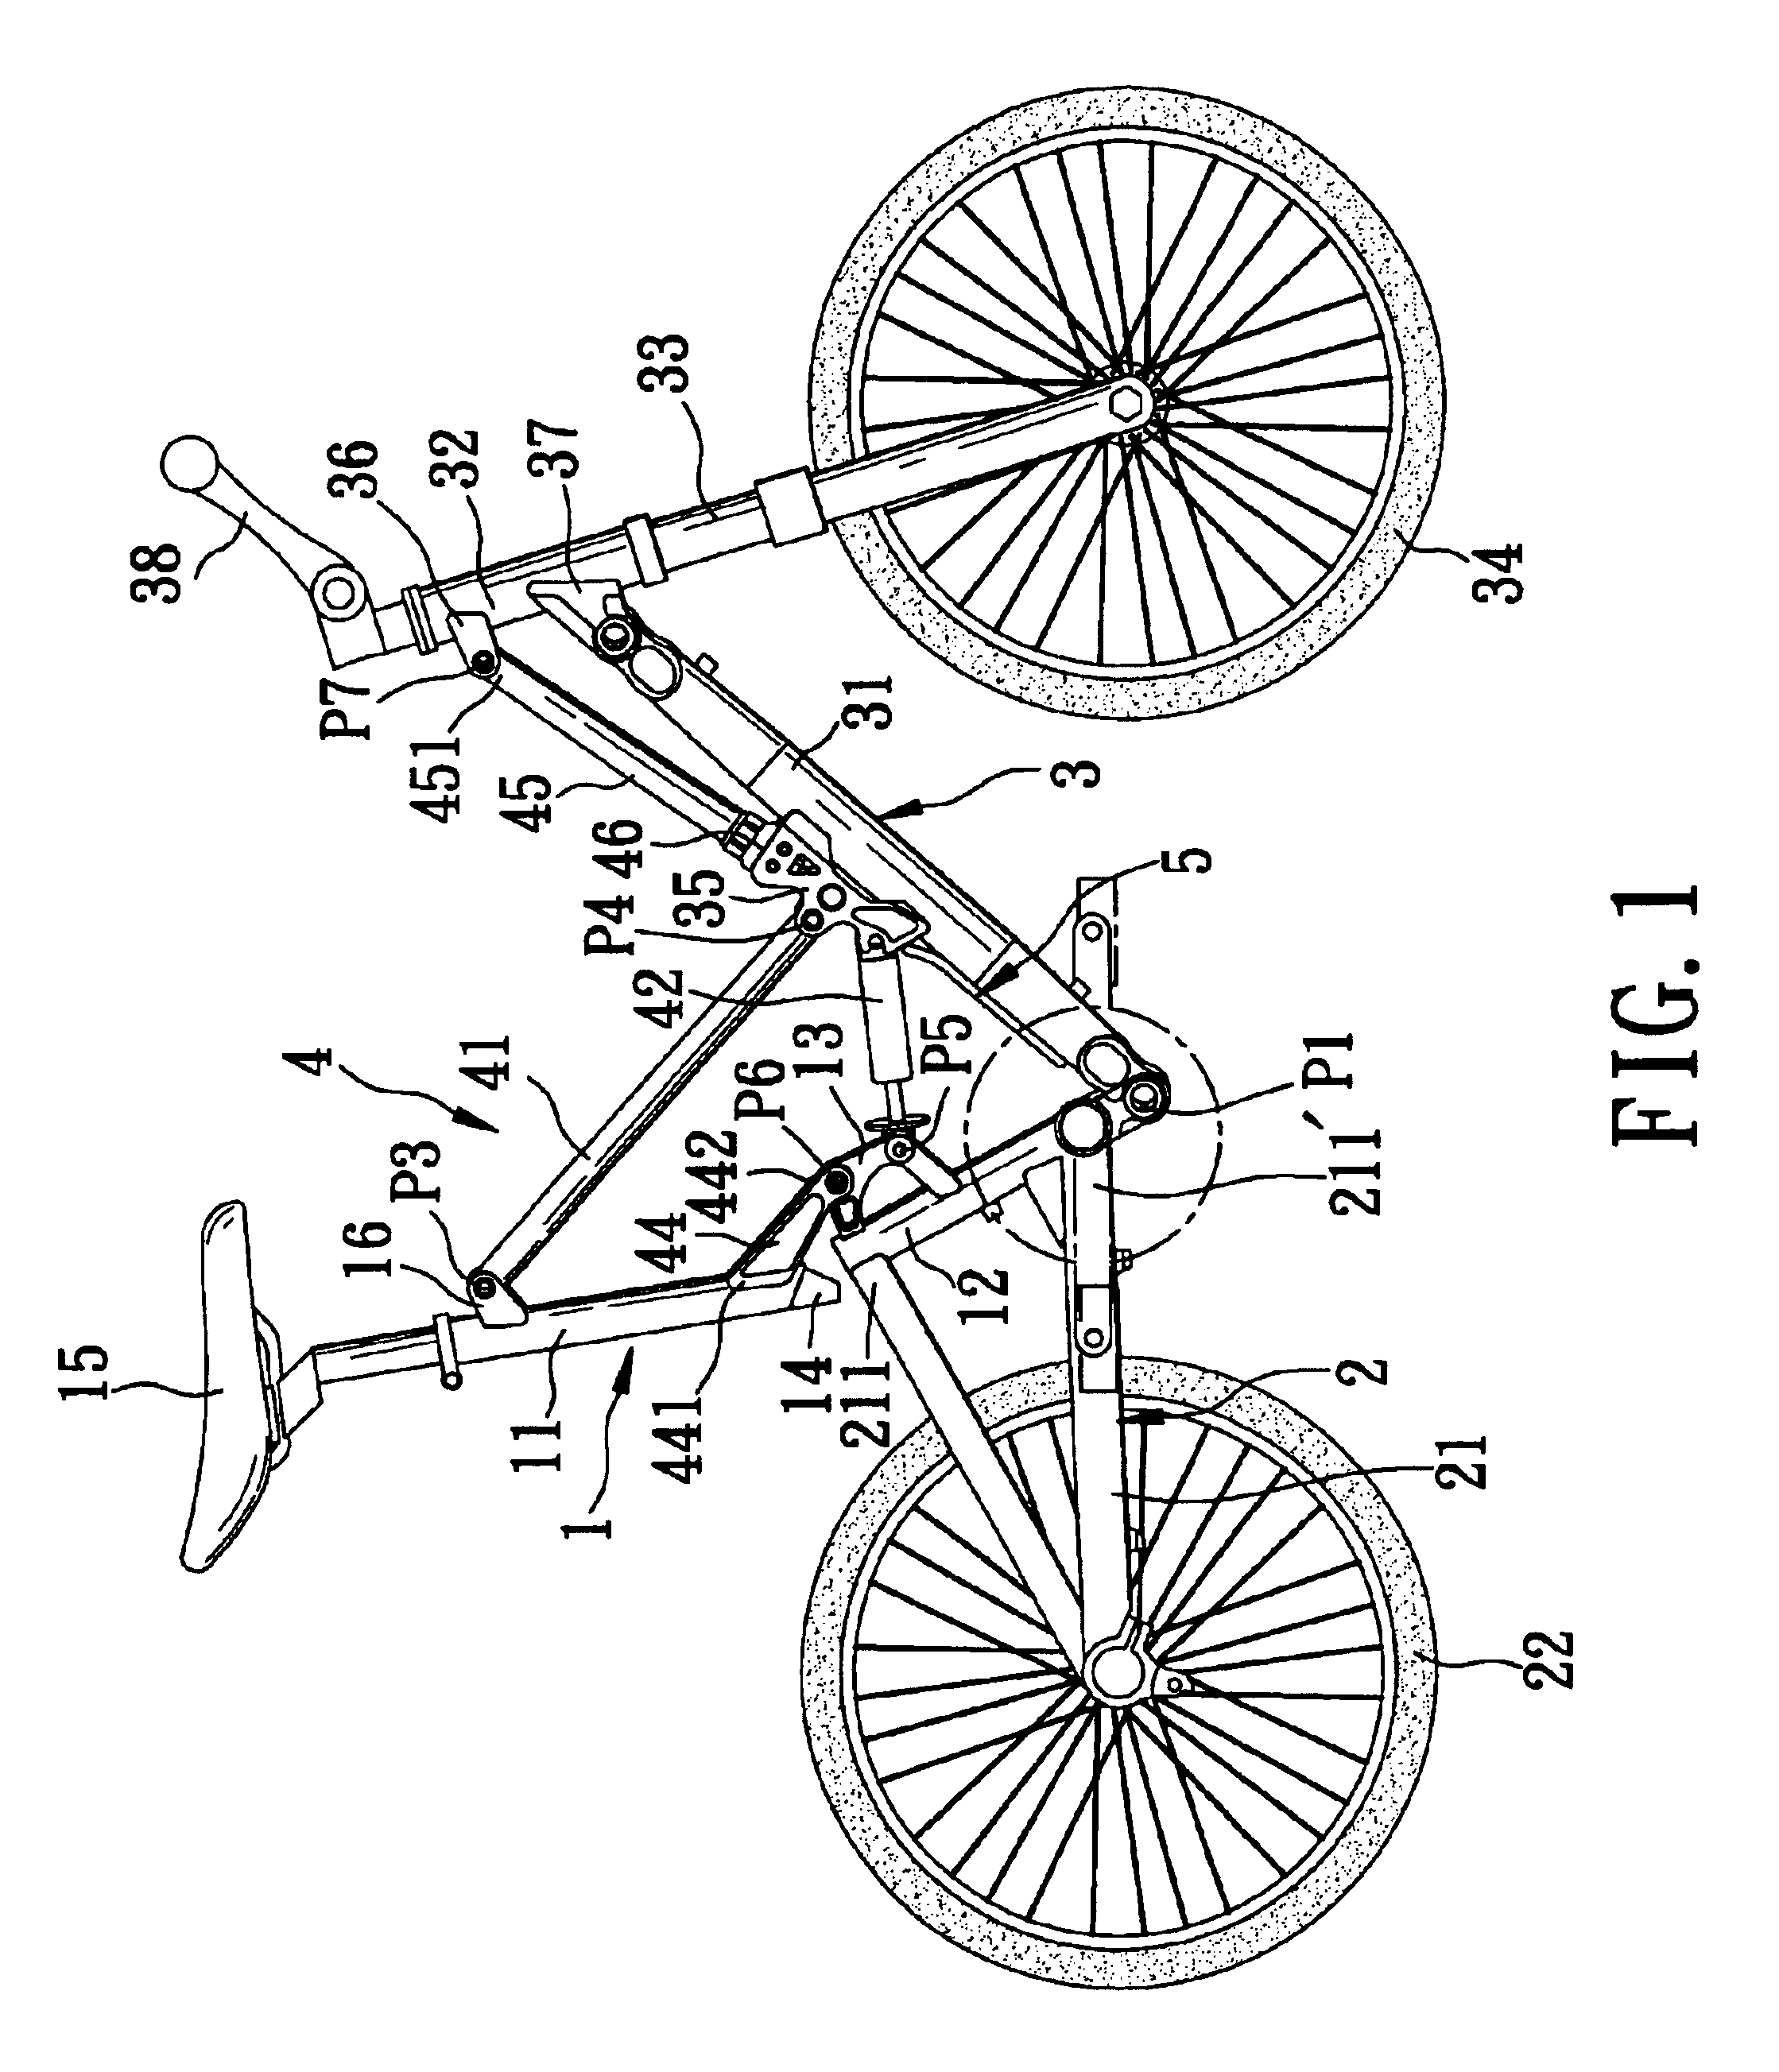 Bicycle foldable to align front and rear wheels along a transverse direction of the bicycle